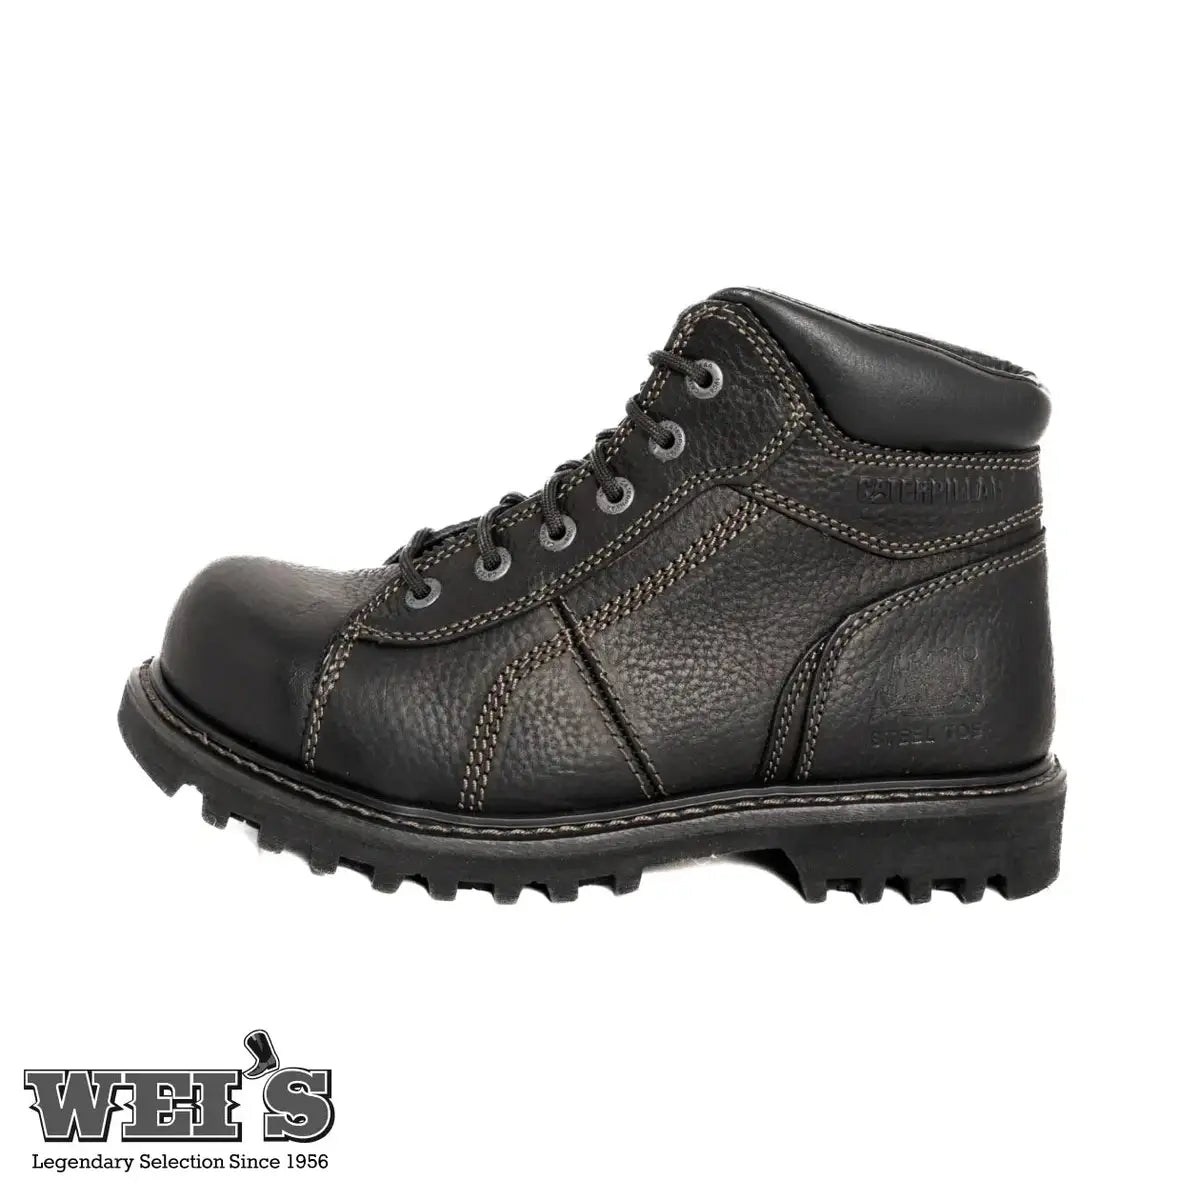 CAT Men's Work Boots 6" Confine CSA Steel Toe P707351, 704089, P707352- Clearance - Clearance